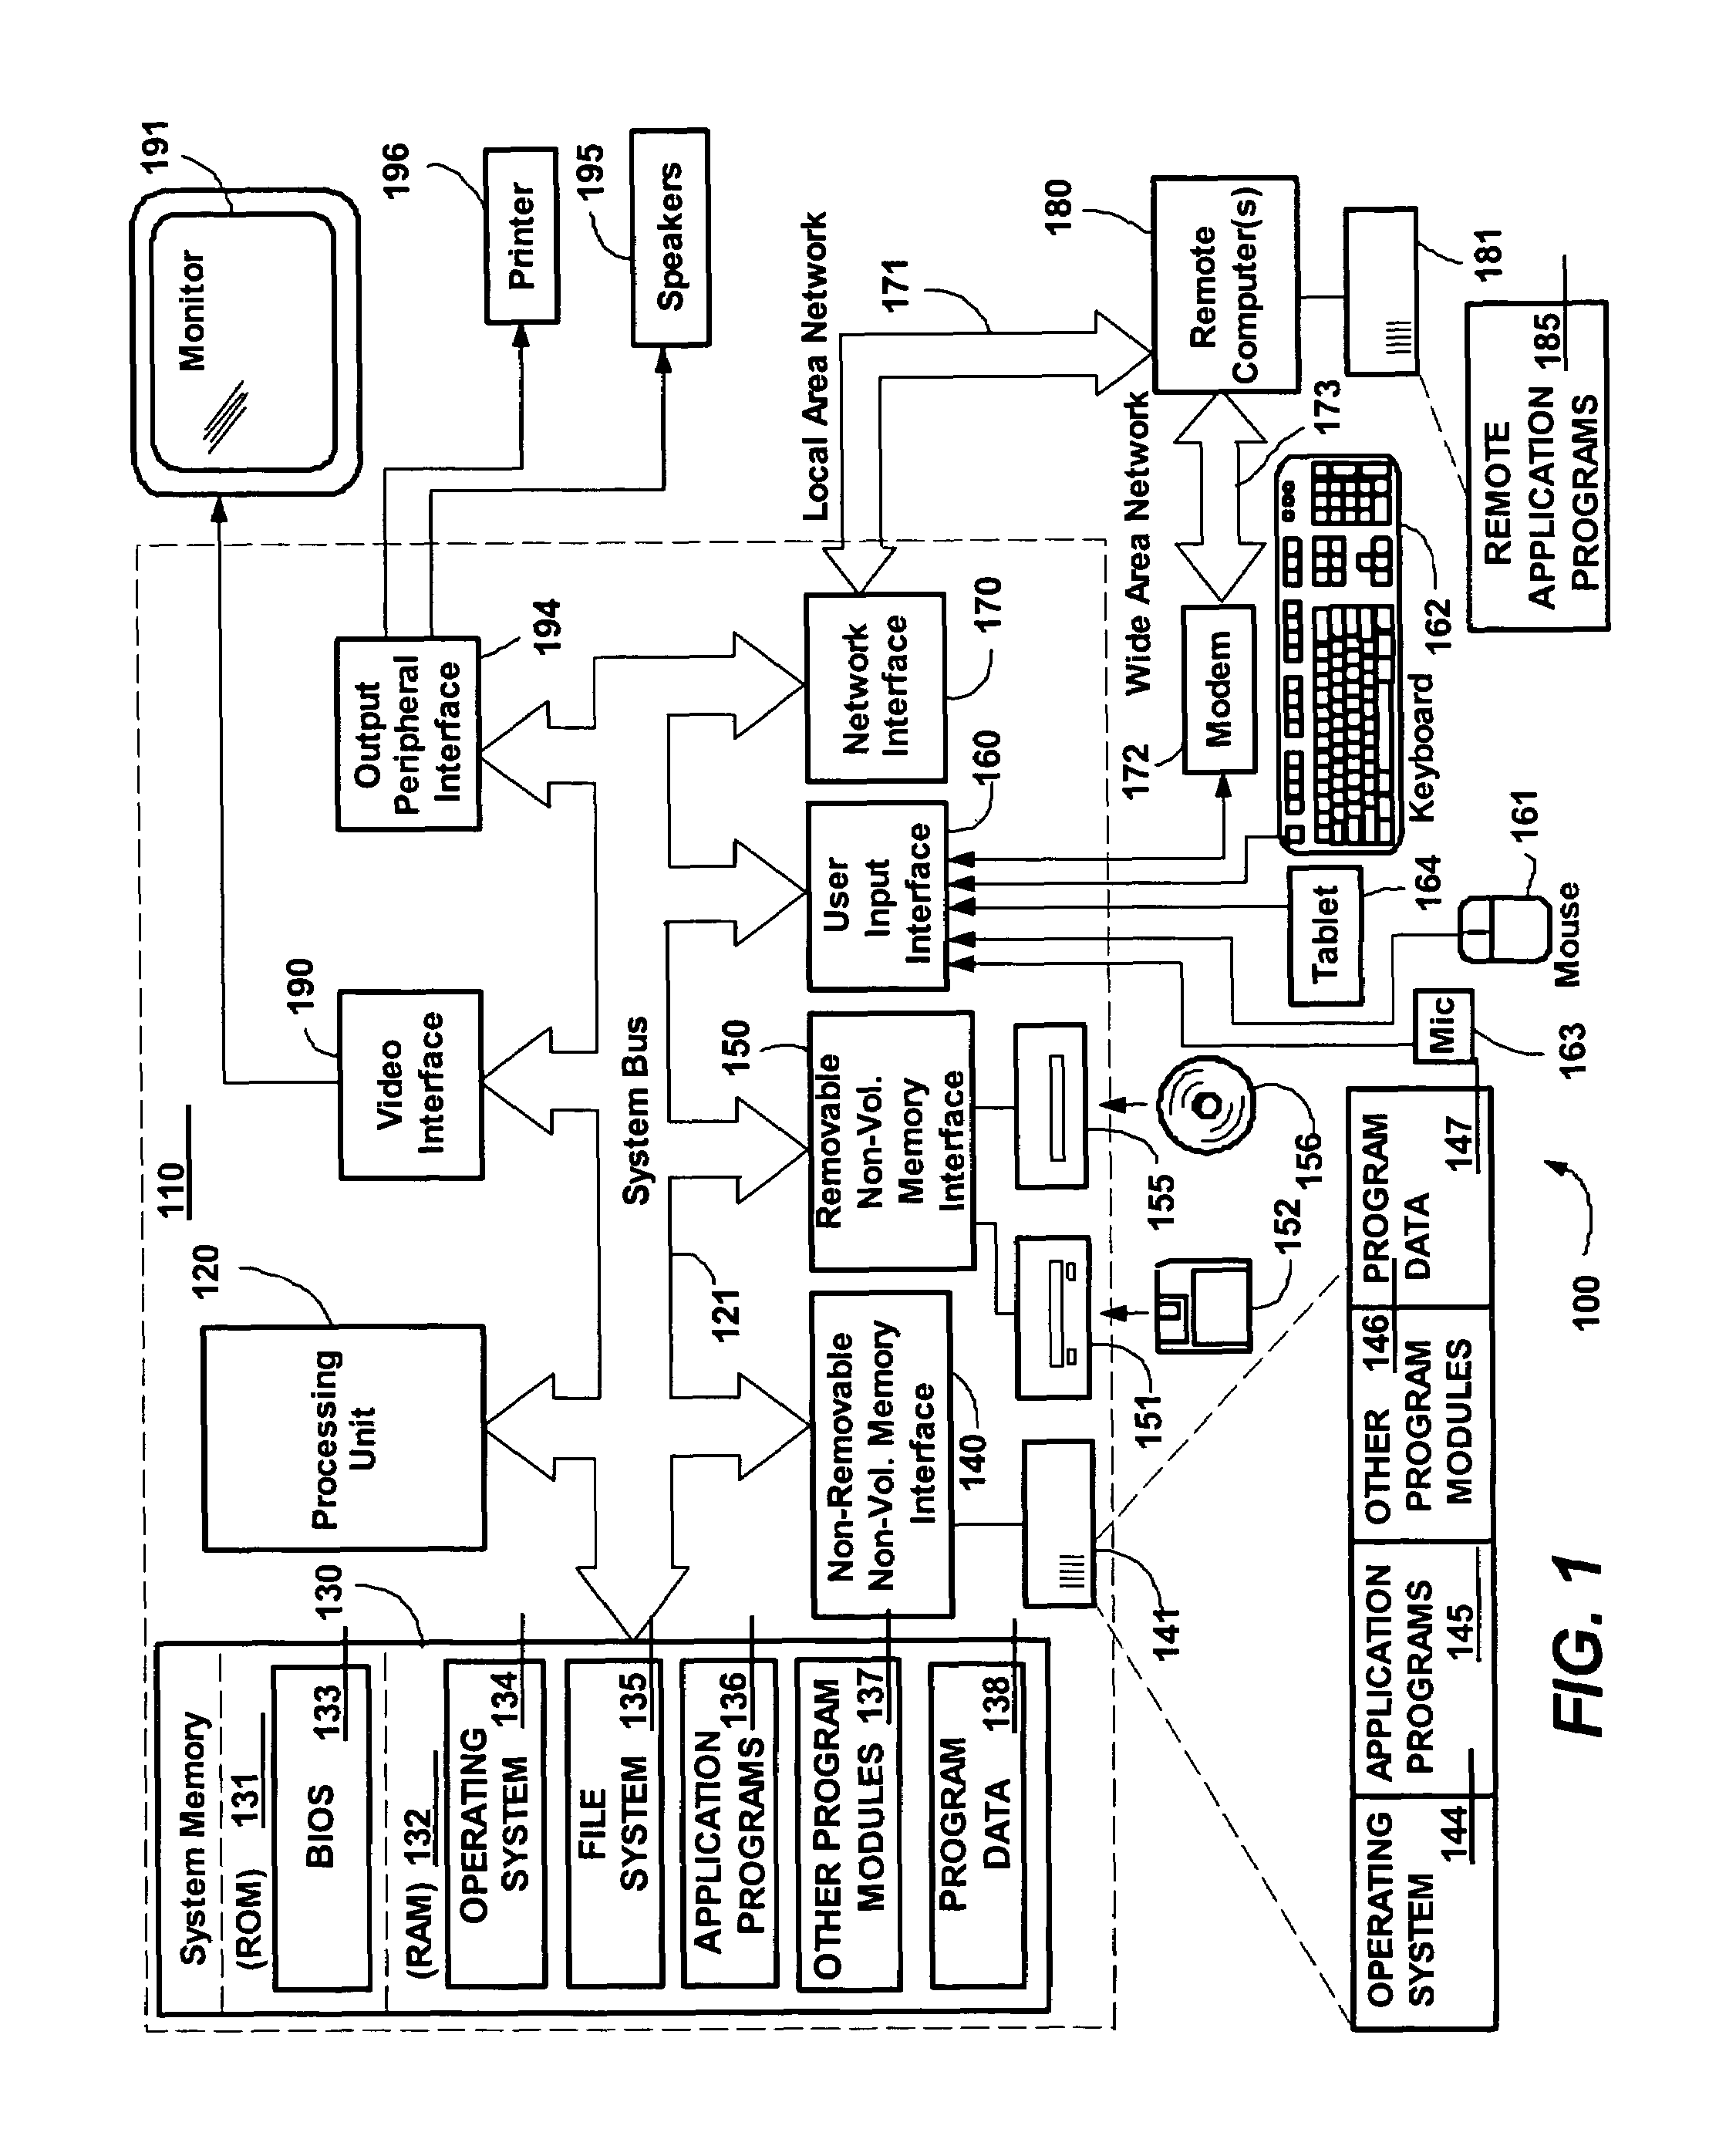 System and method for a unified composition engine in a graphics processing system